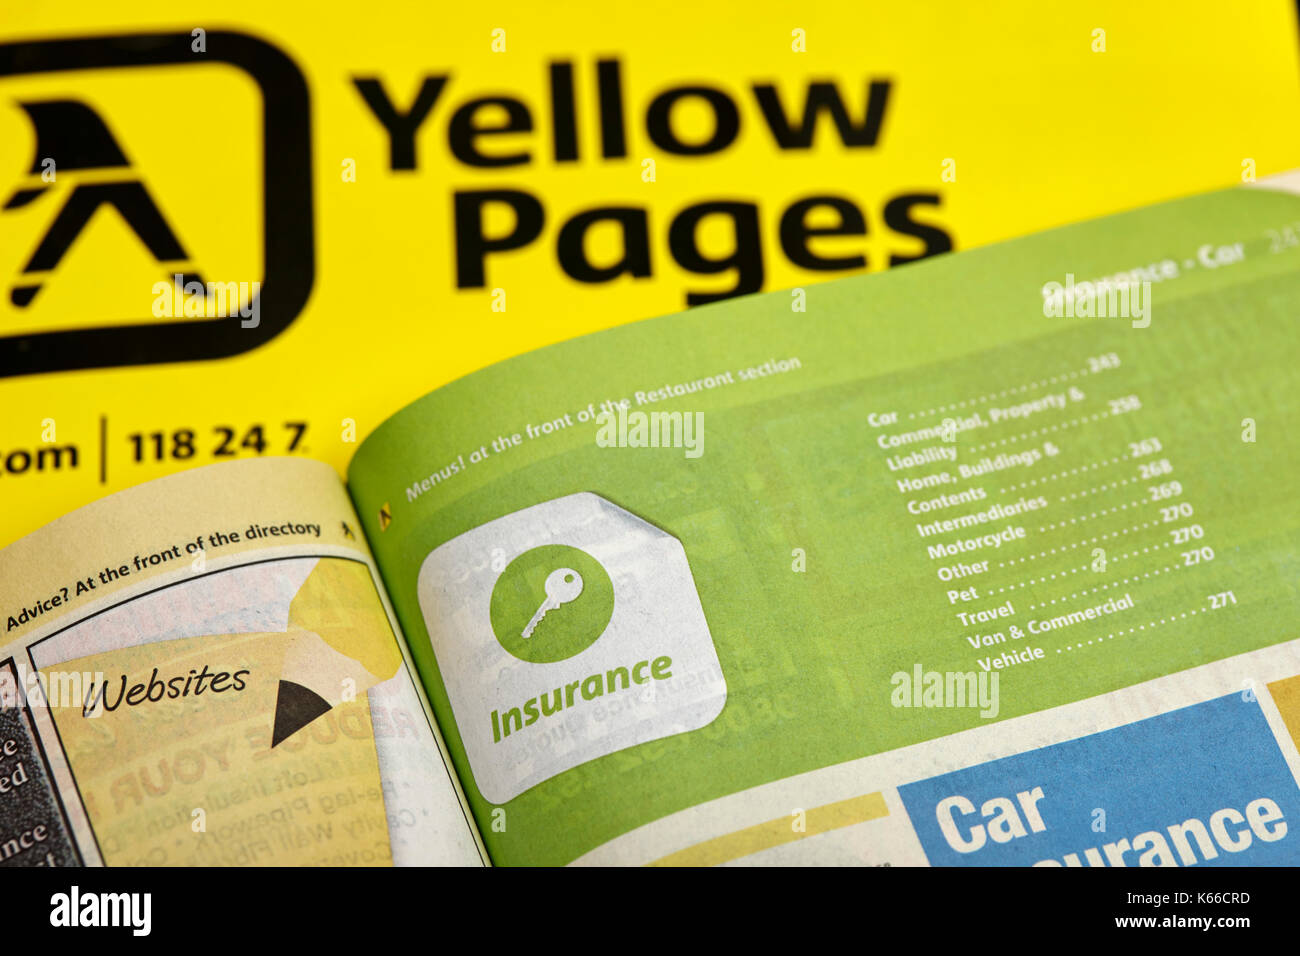 insurance section of yellow pages classified telephone directory paper edition uk Stock Photo